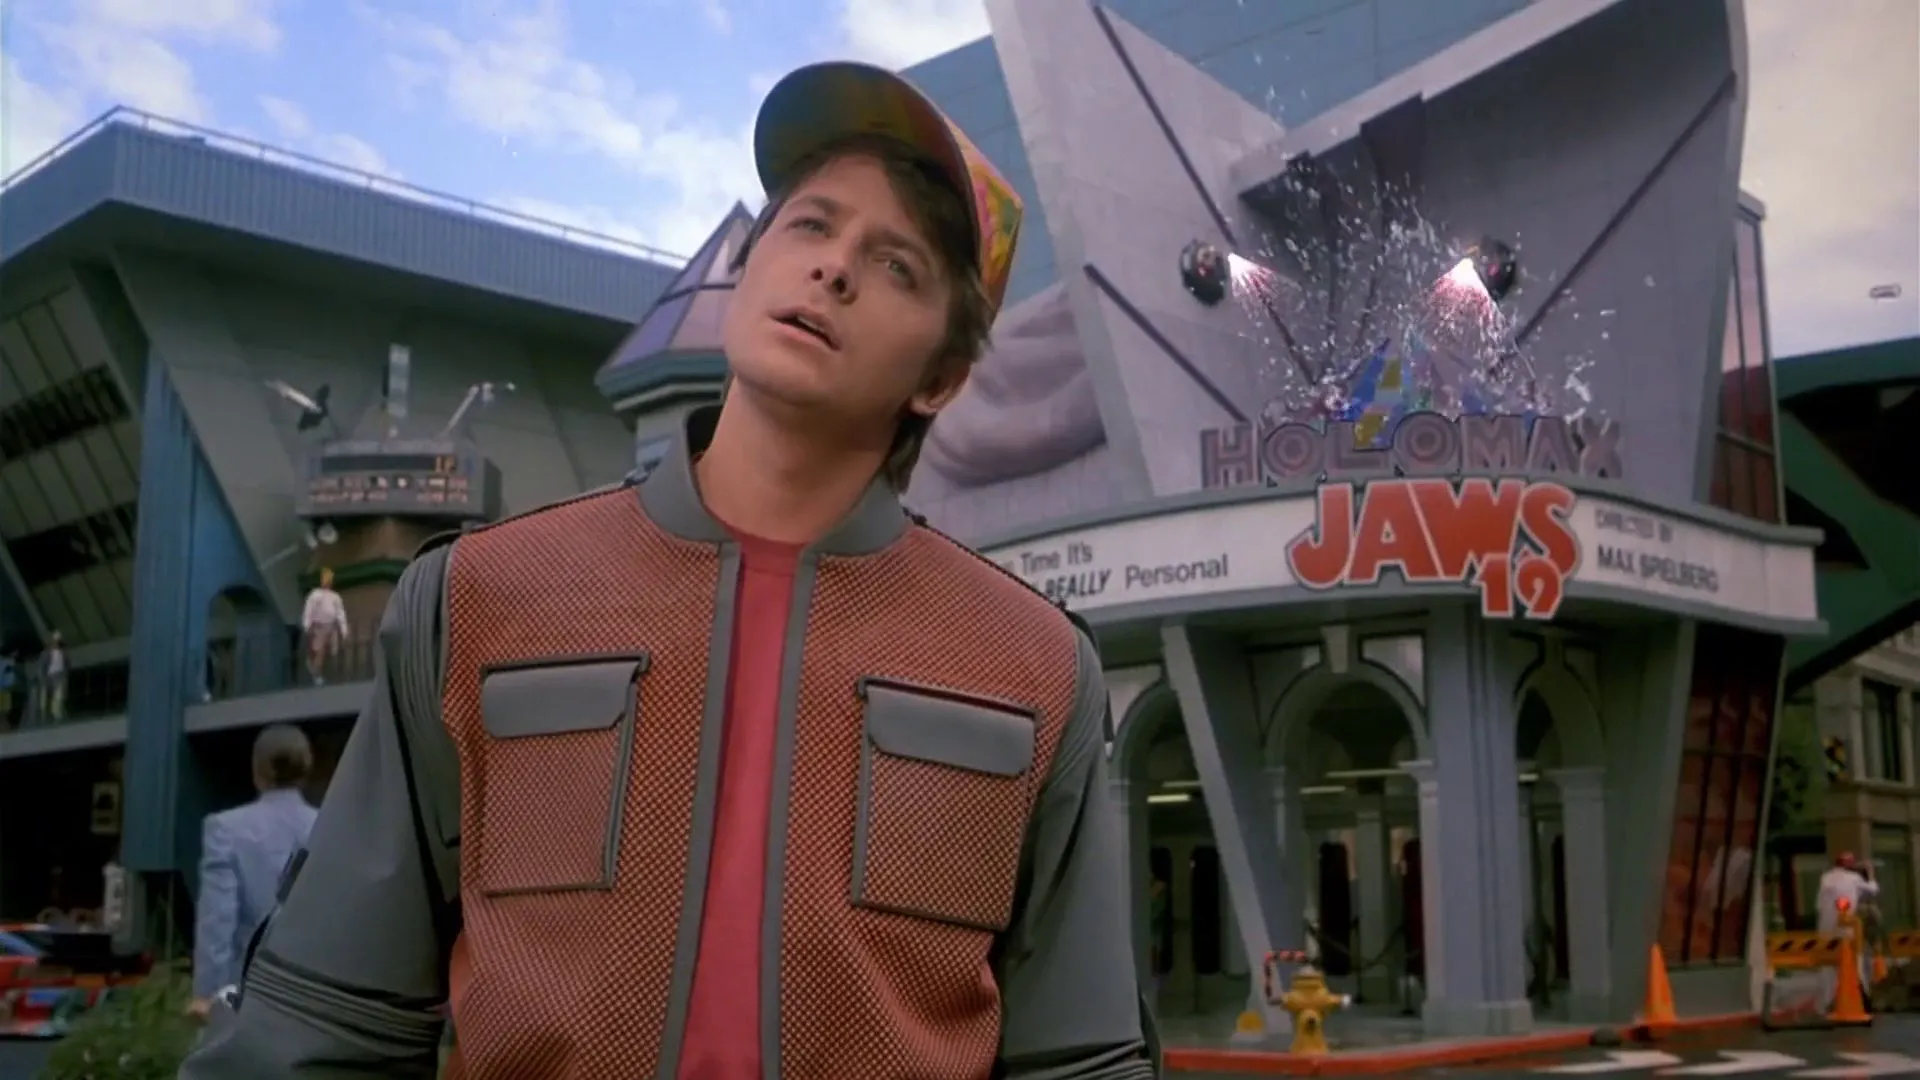 Screenshot of the "Jaws 19" billboard from "Back to the Future II"